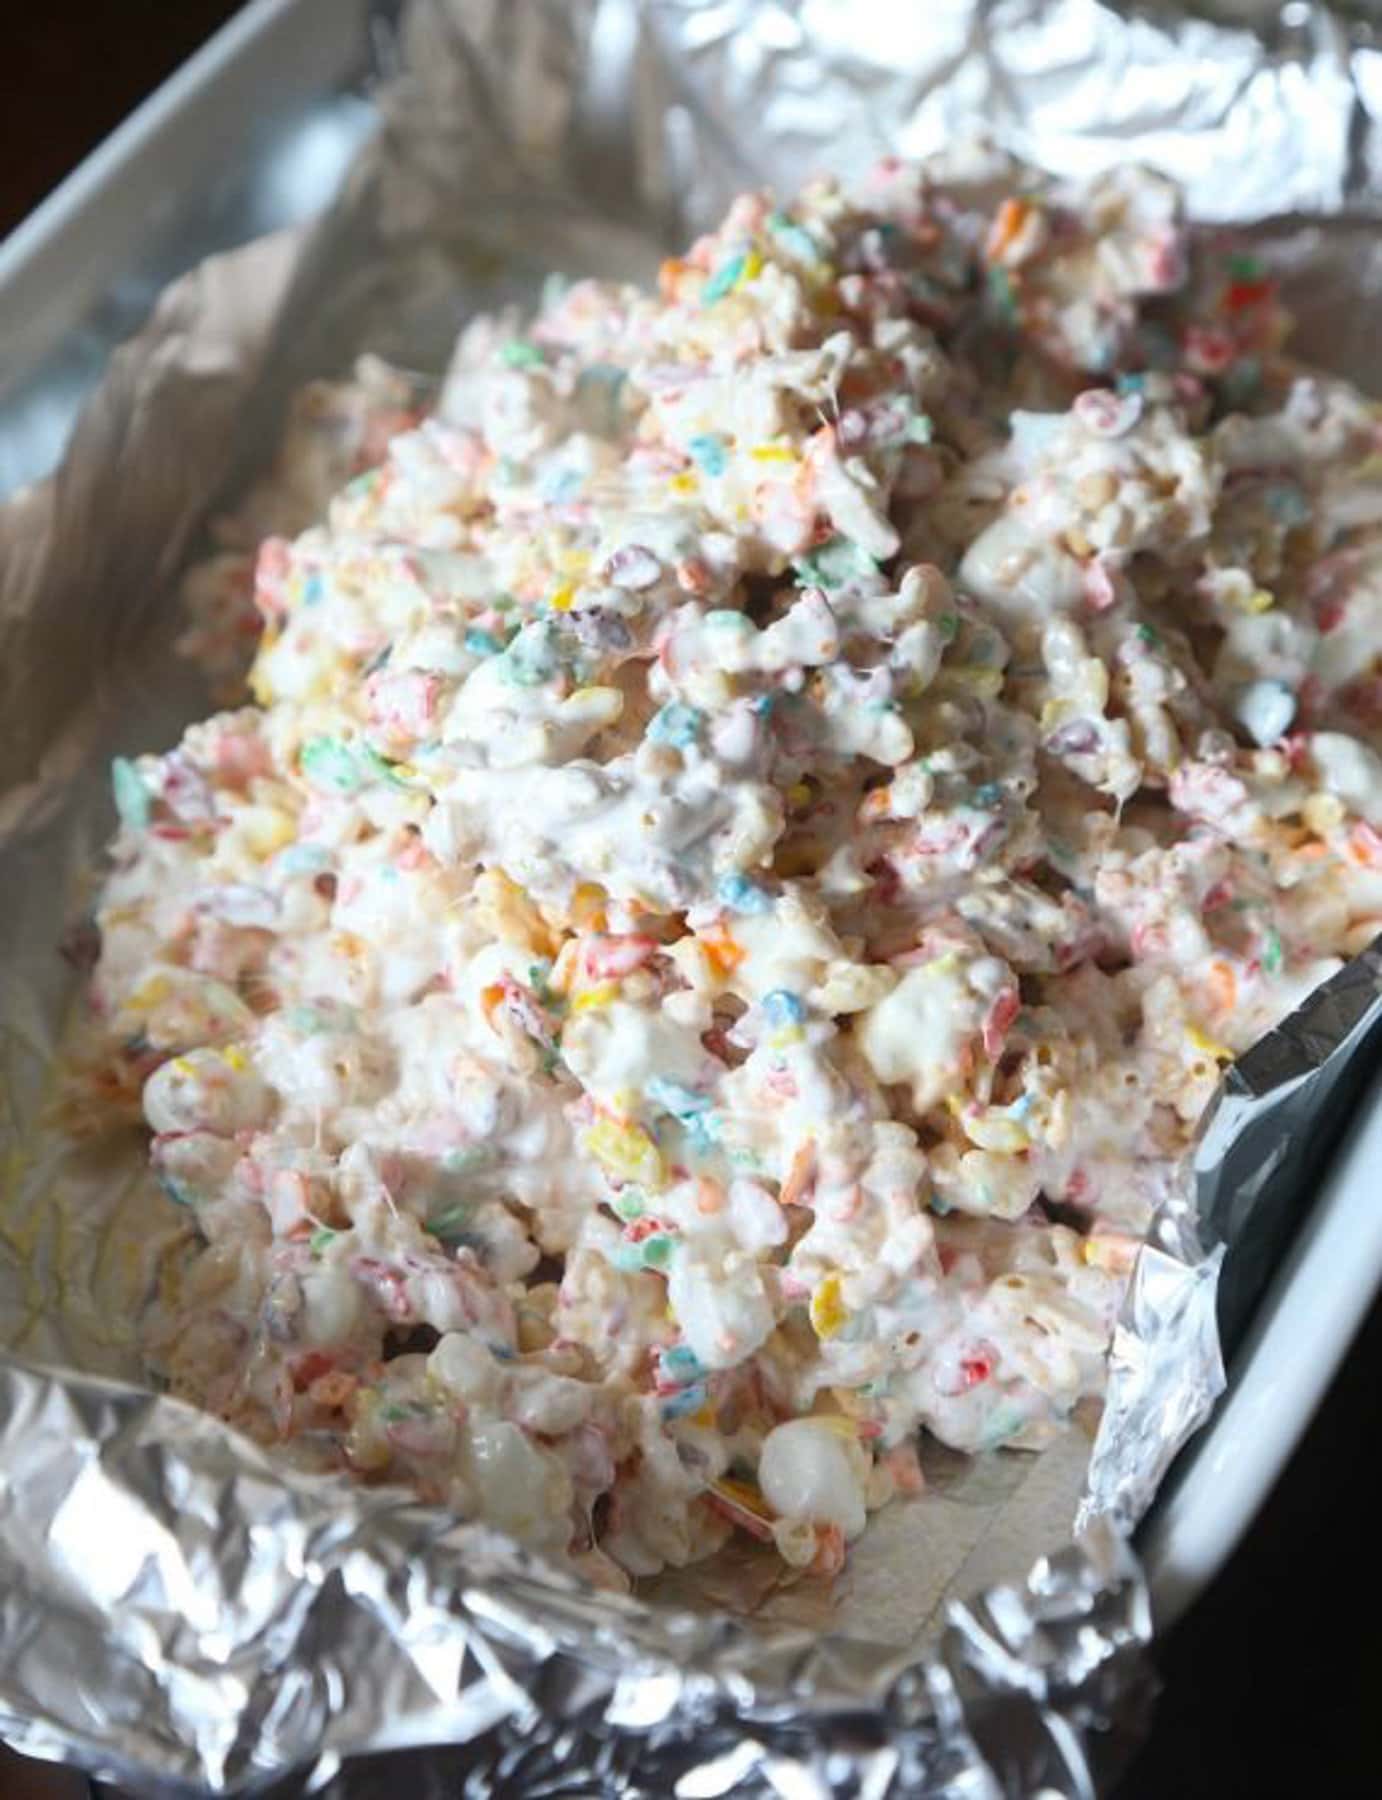 Krispie Treats made with Fluff and mini marshmallows being spread into a foil-lined pan